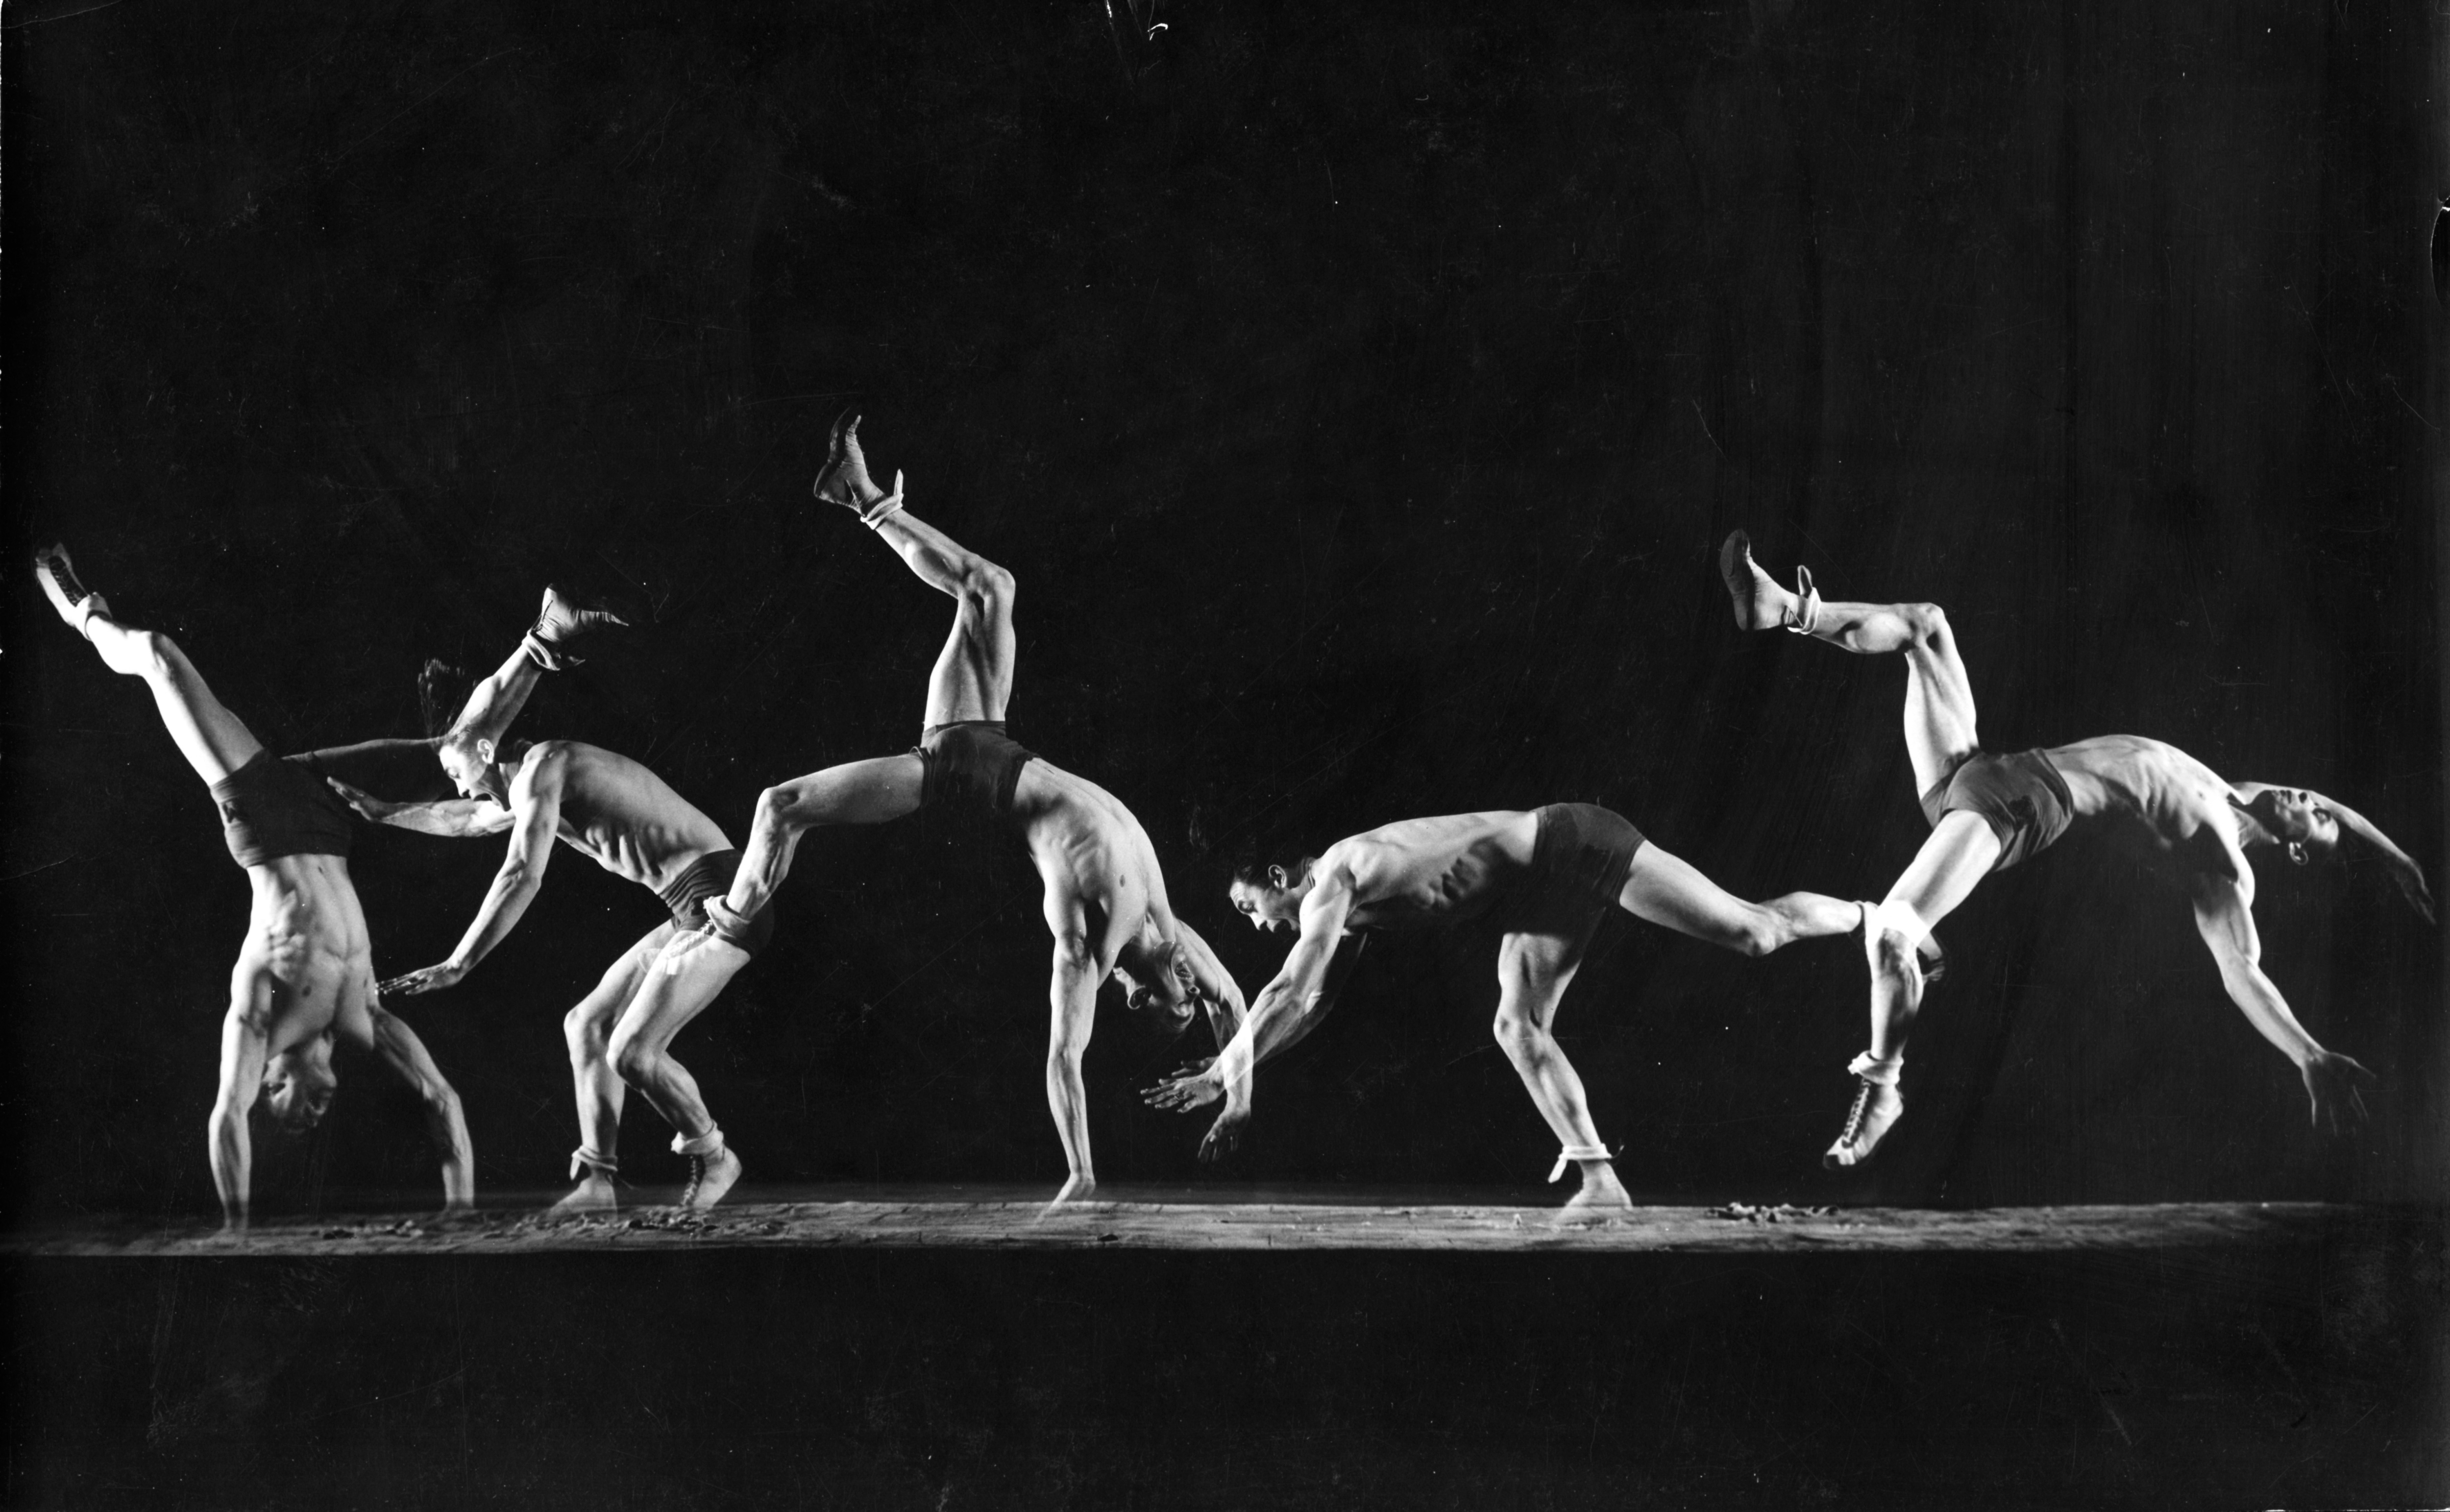 A stroboscopic multiple exposure image of intercollegiate champion gymnast Newt Loken doing cartwheels from left to right in 1942.